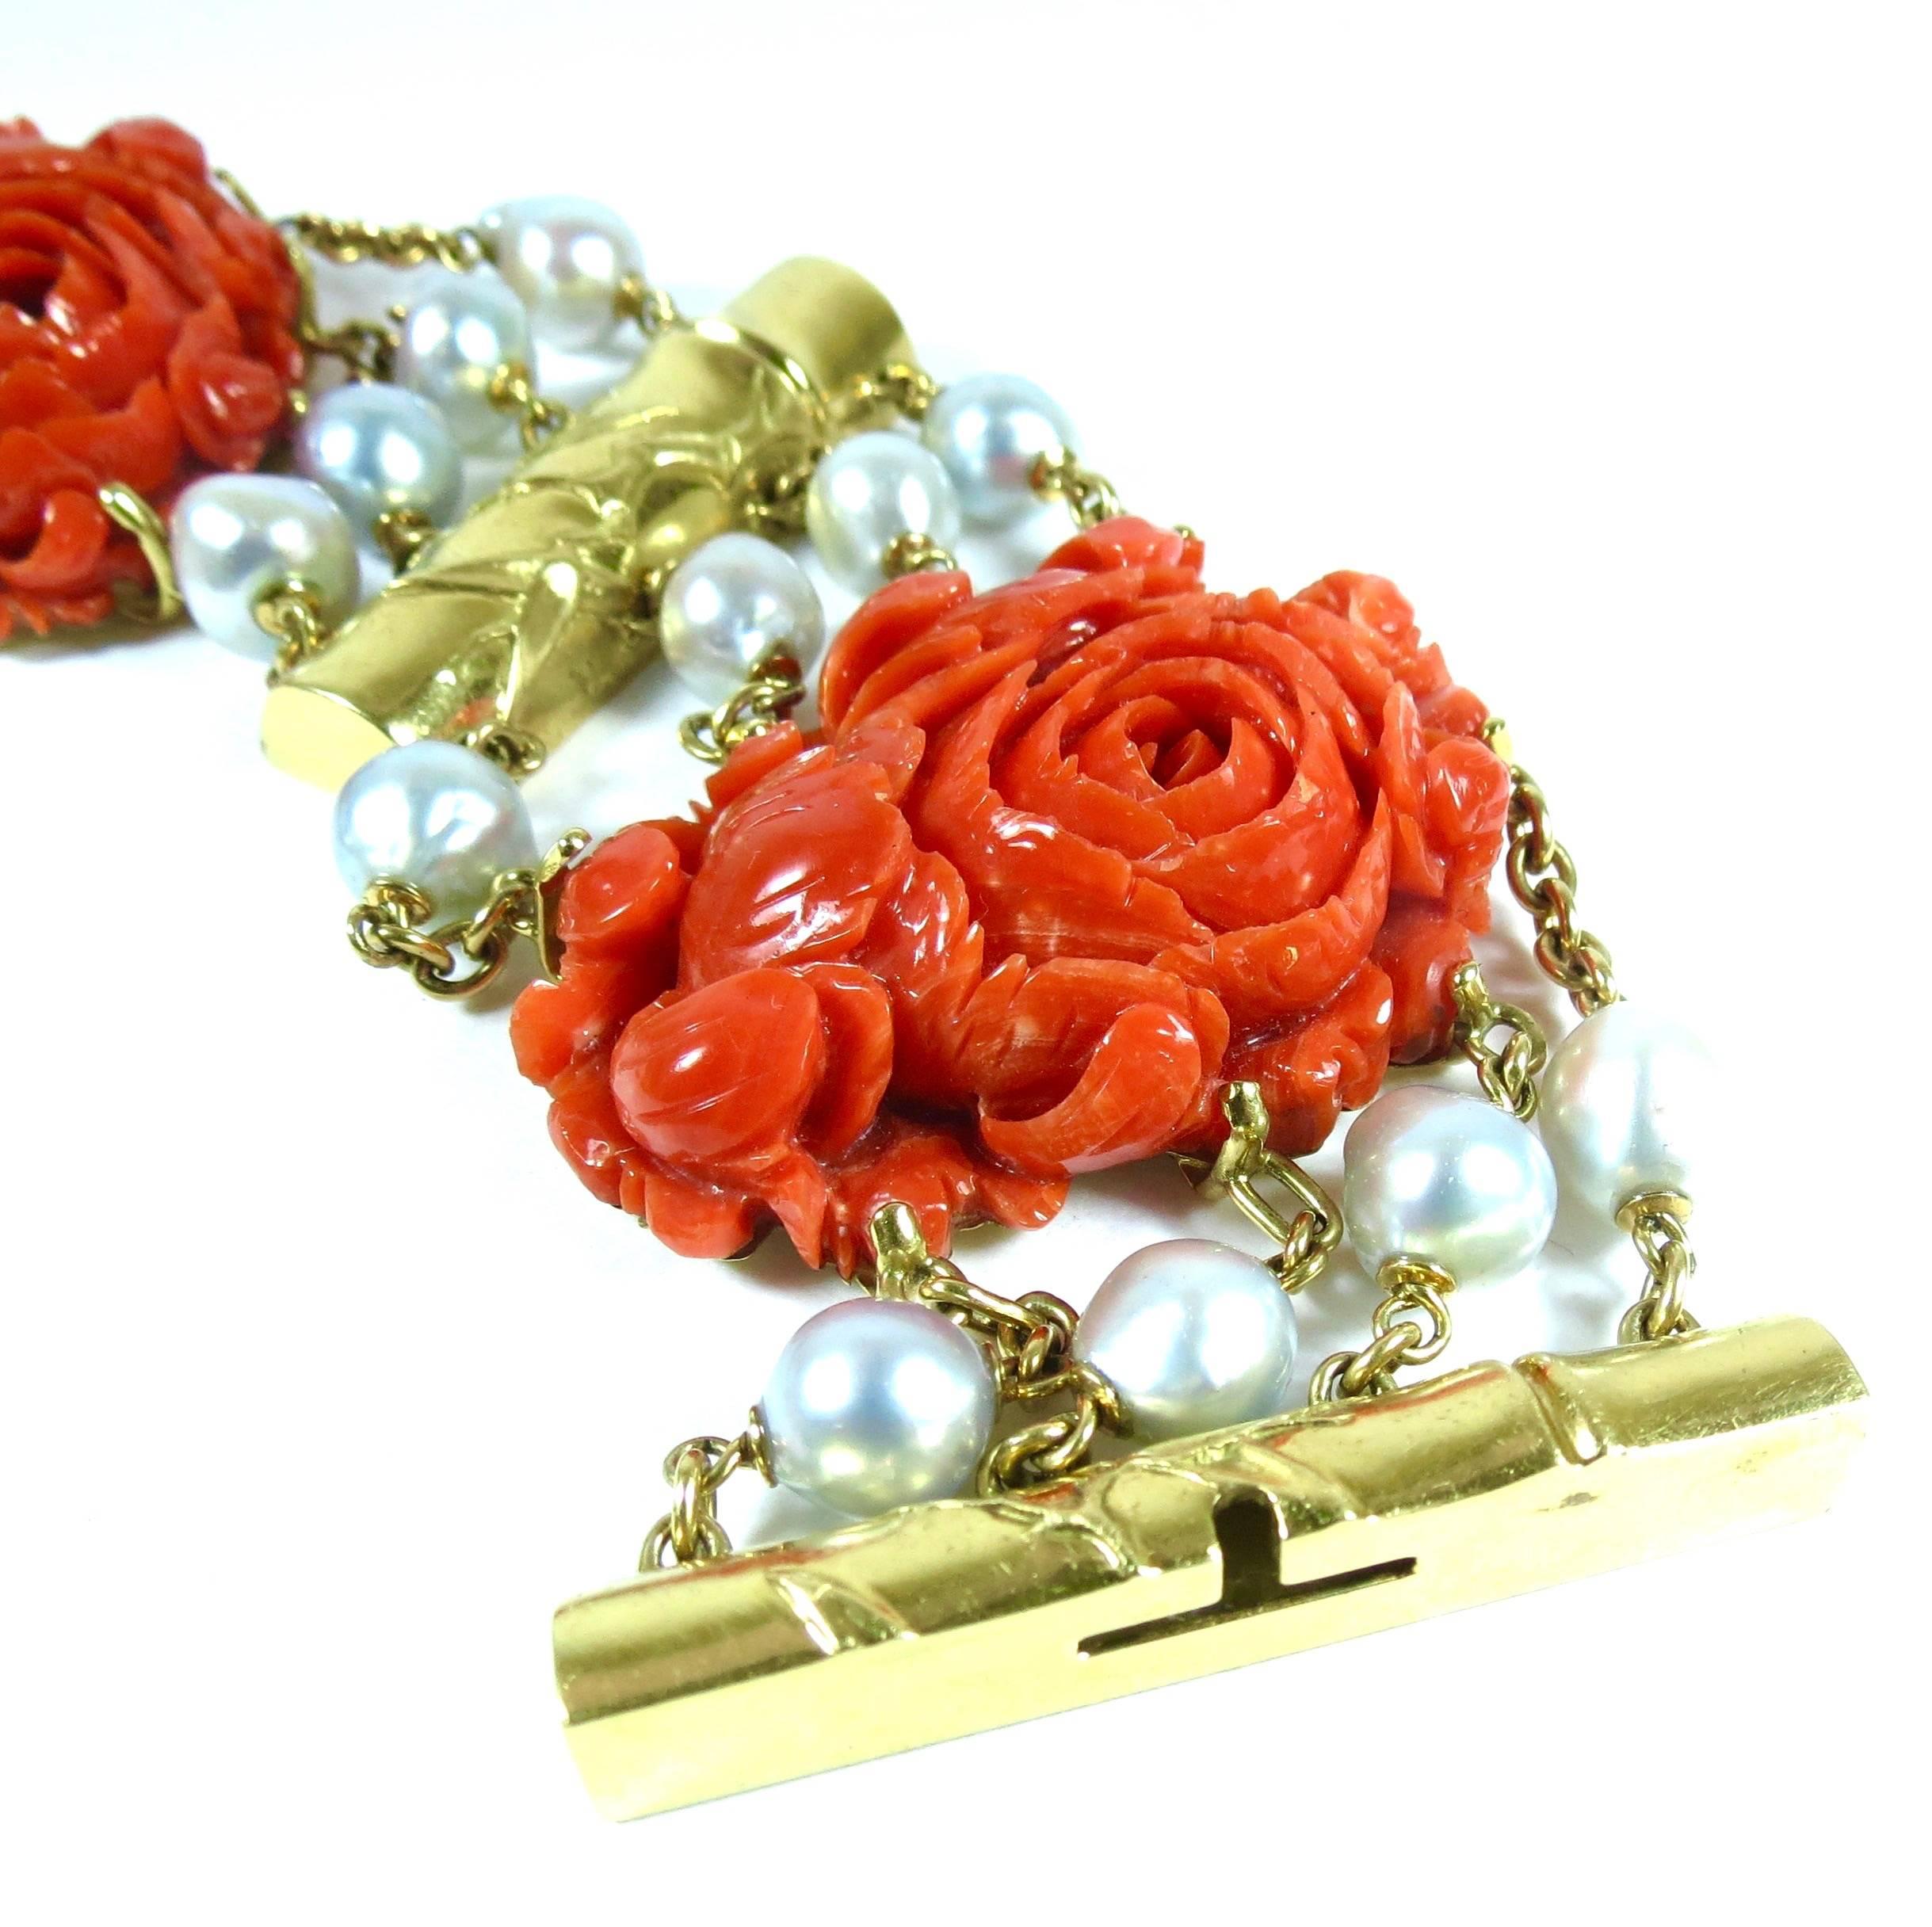 Amazing Seaman Shepps 18K yellow gold, large carved Mediterranean Coral and cultured South Sea Pearl bracelet. 

Measurements: 7